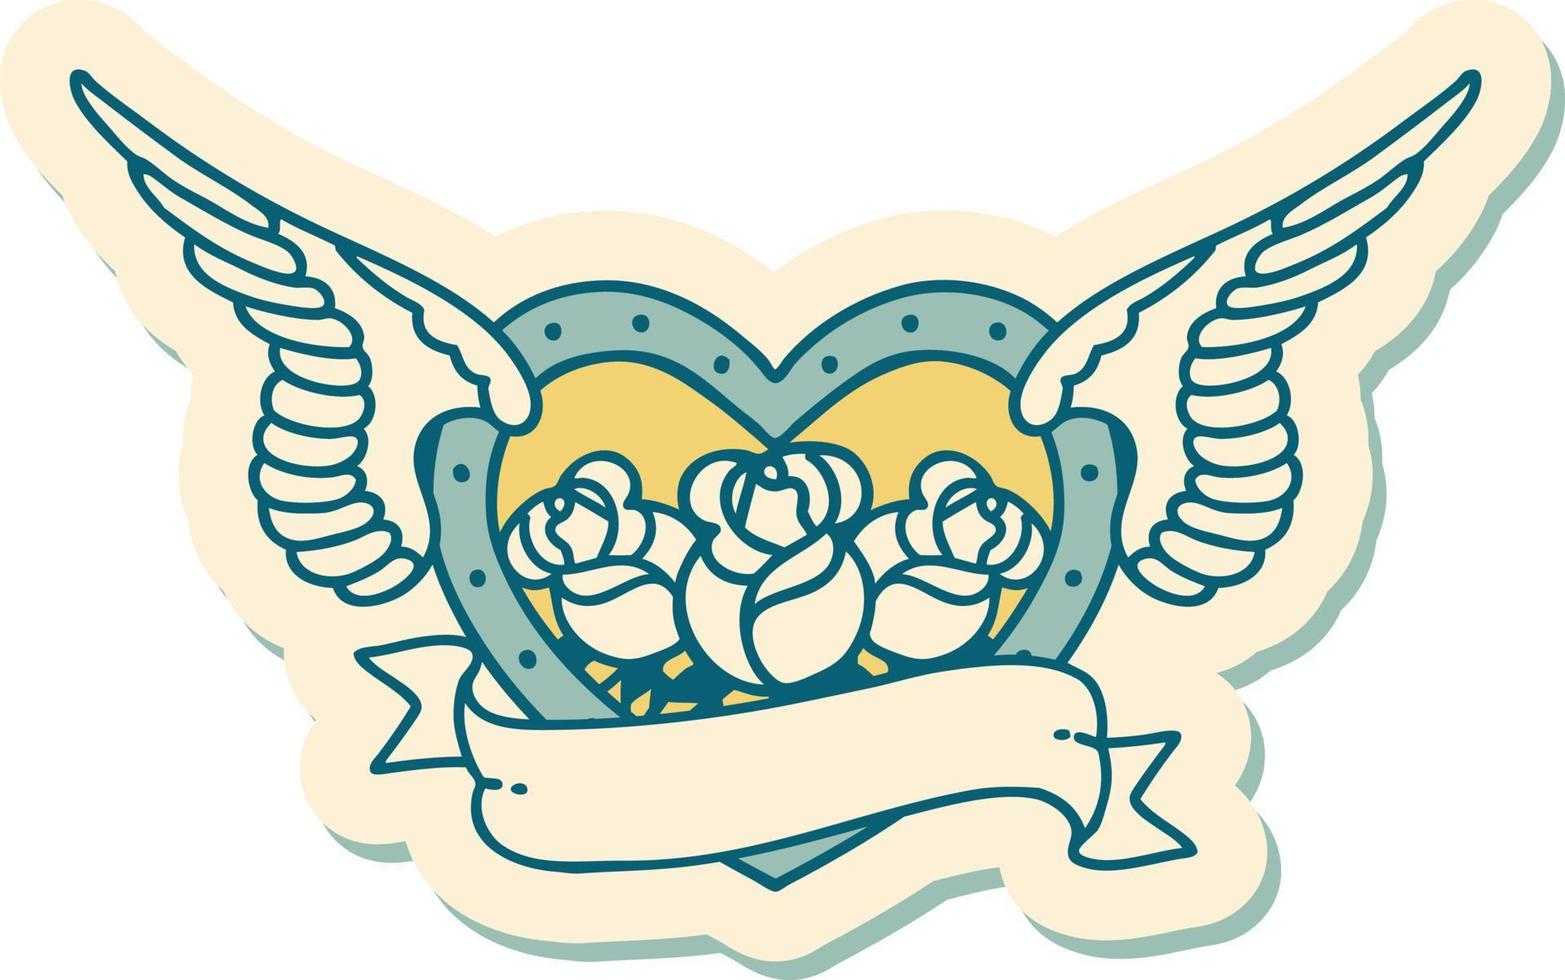 sticker of tattoo in traditional style of a flying heart with flowers and banner vector